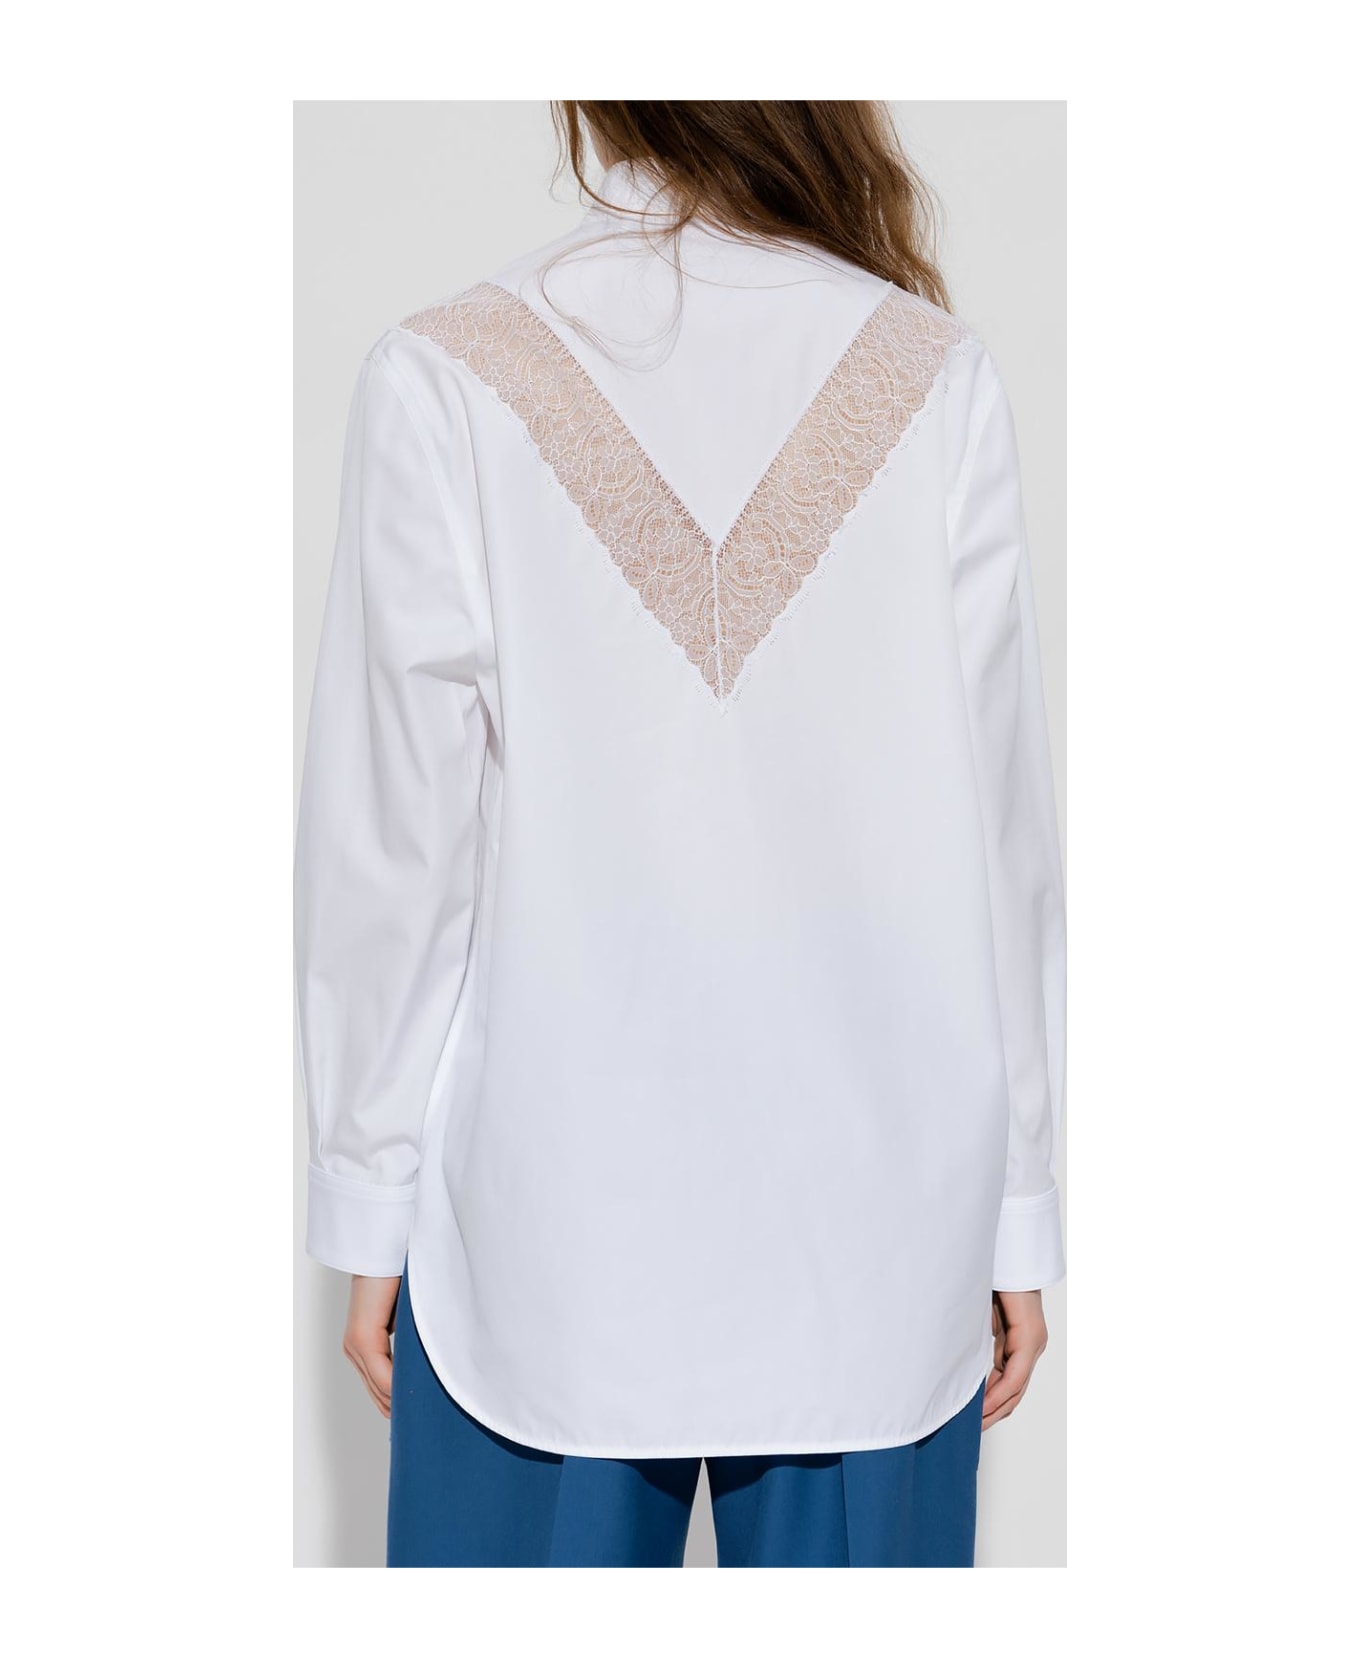 Burberry Shirt With Lace Inserts - White シャツ